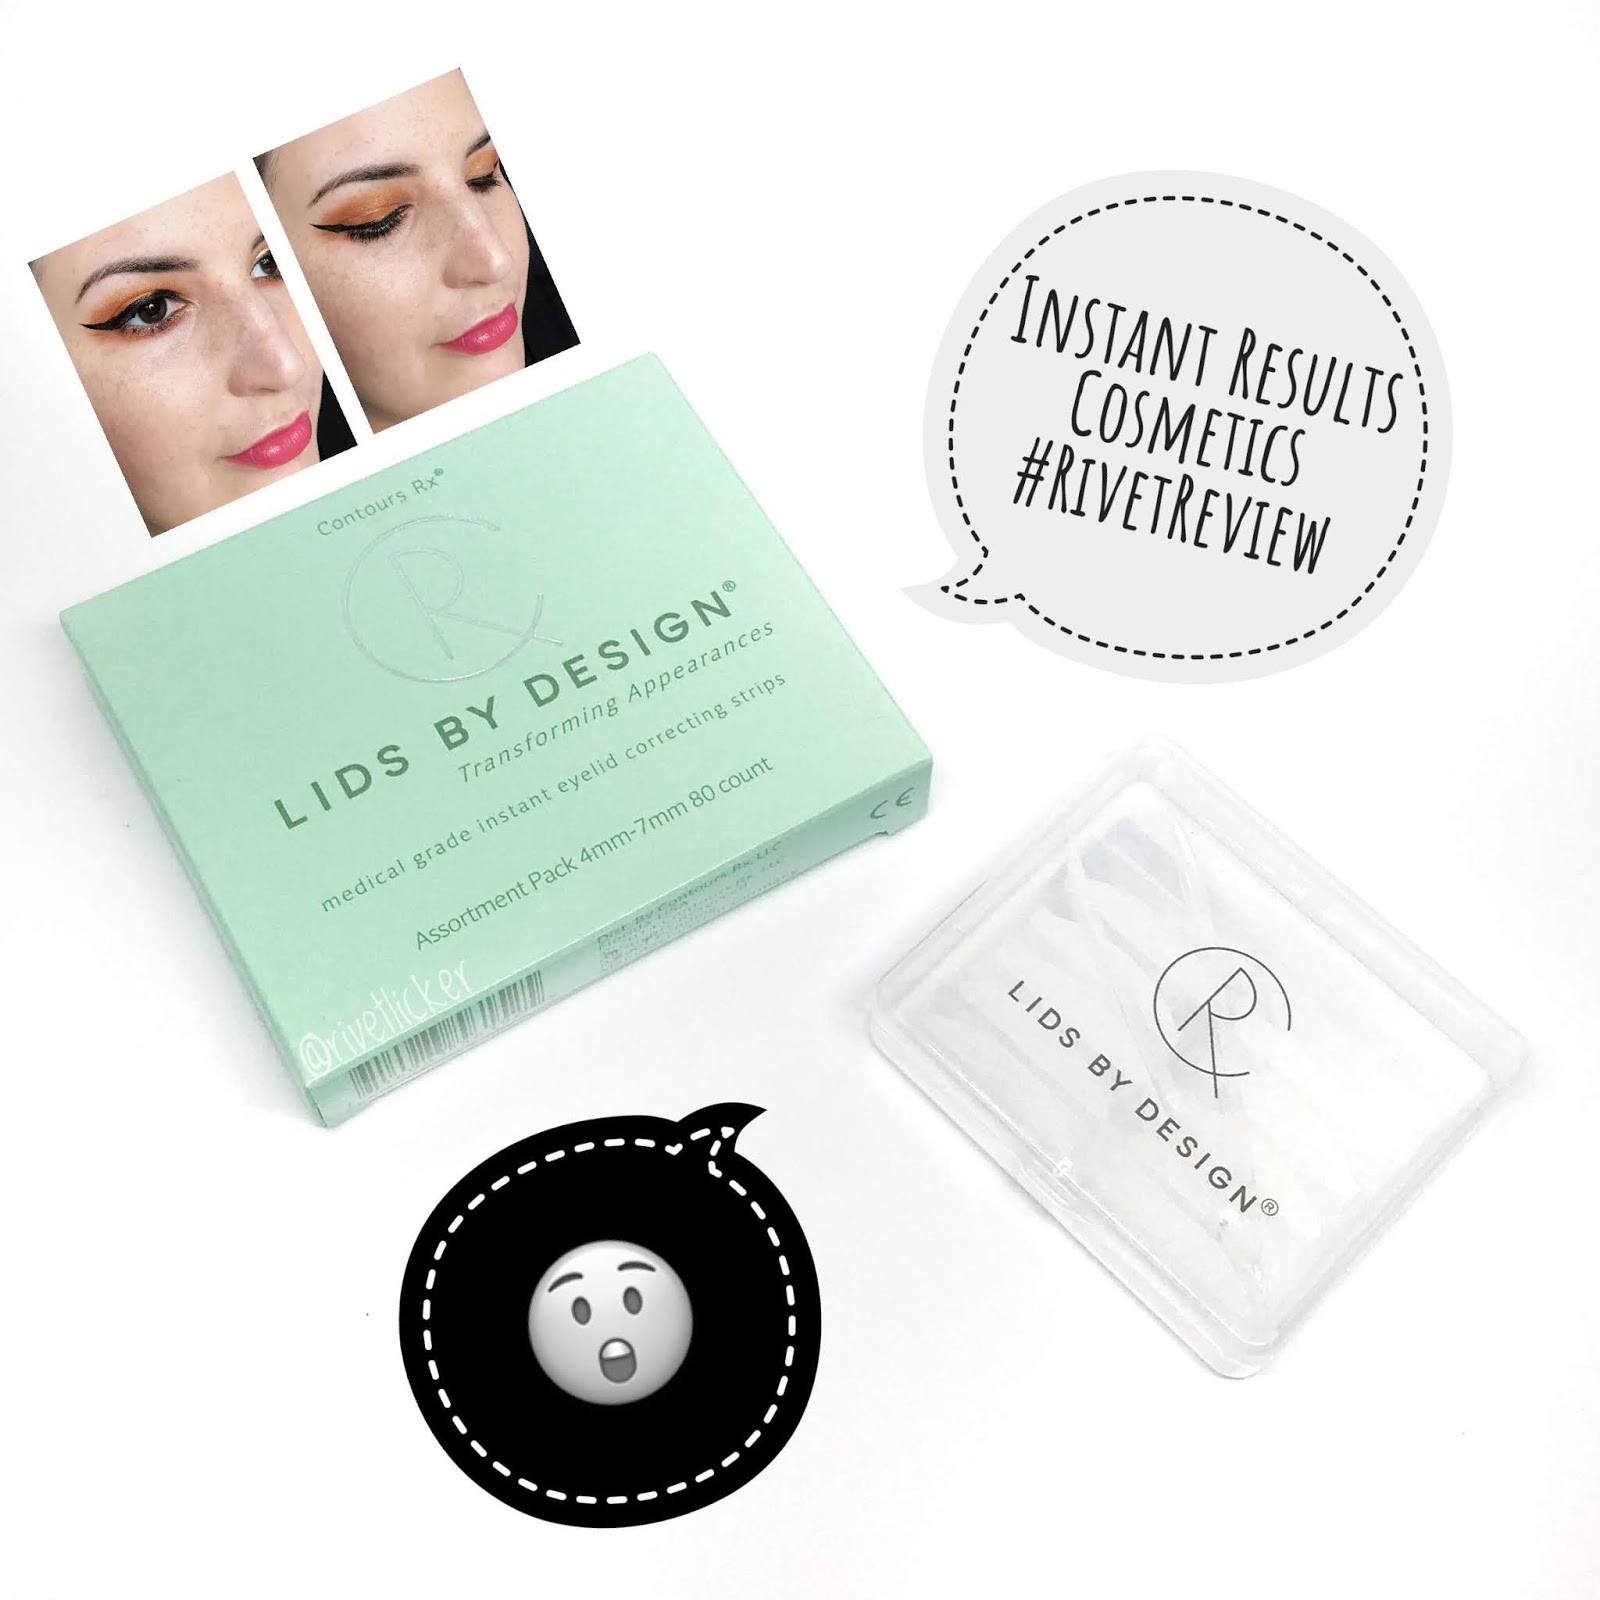 Rivet Licker: INSTANT RESULTS COSMETICS, Hooded Eyelid Holy Grail?  Contours Rx Lids By Design